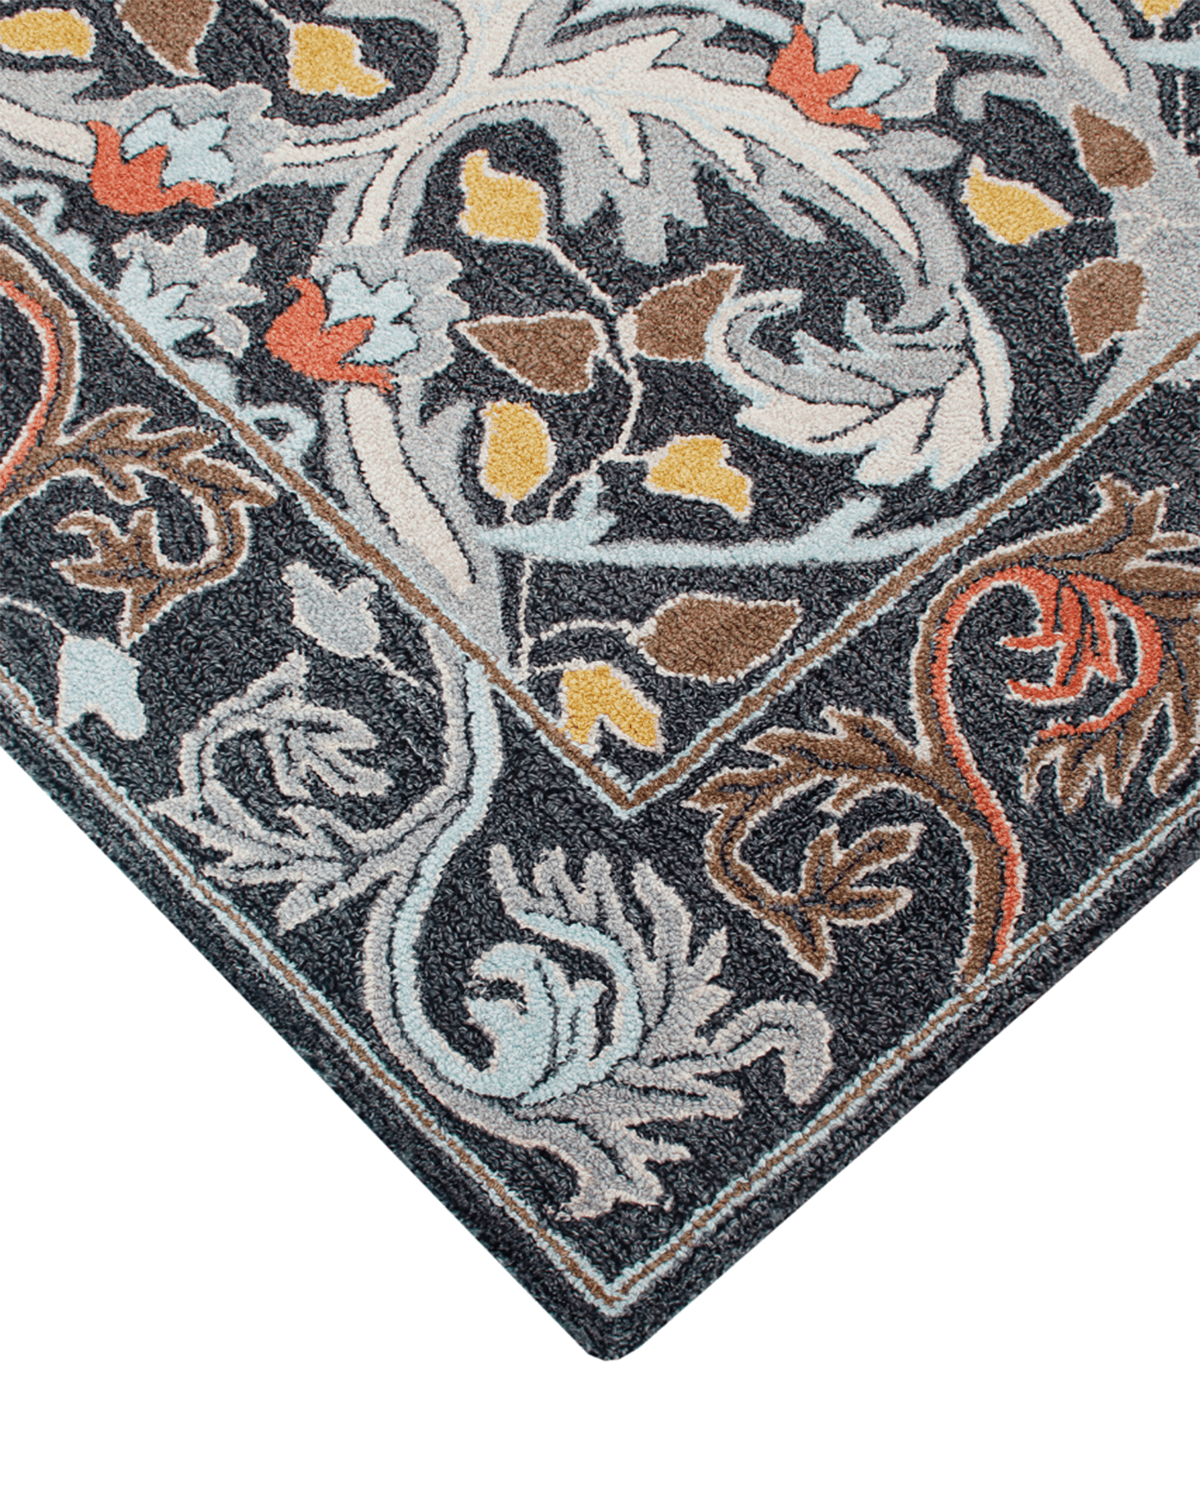 Hand-tufted Traditional Rug (FR-003)